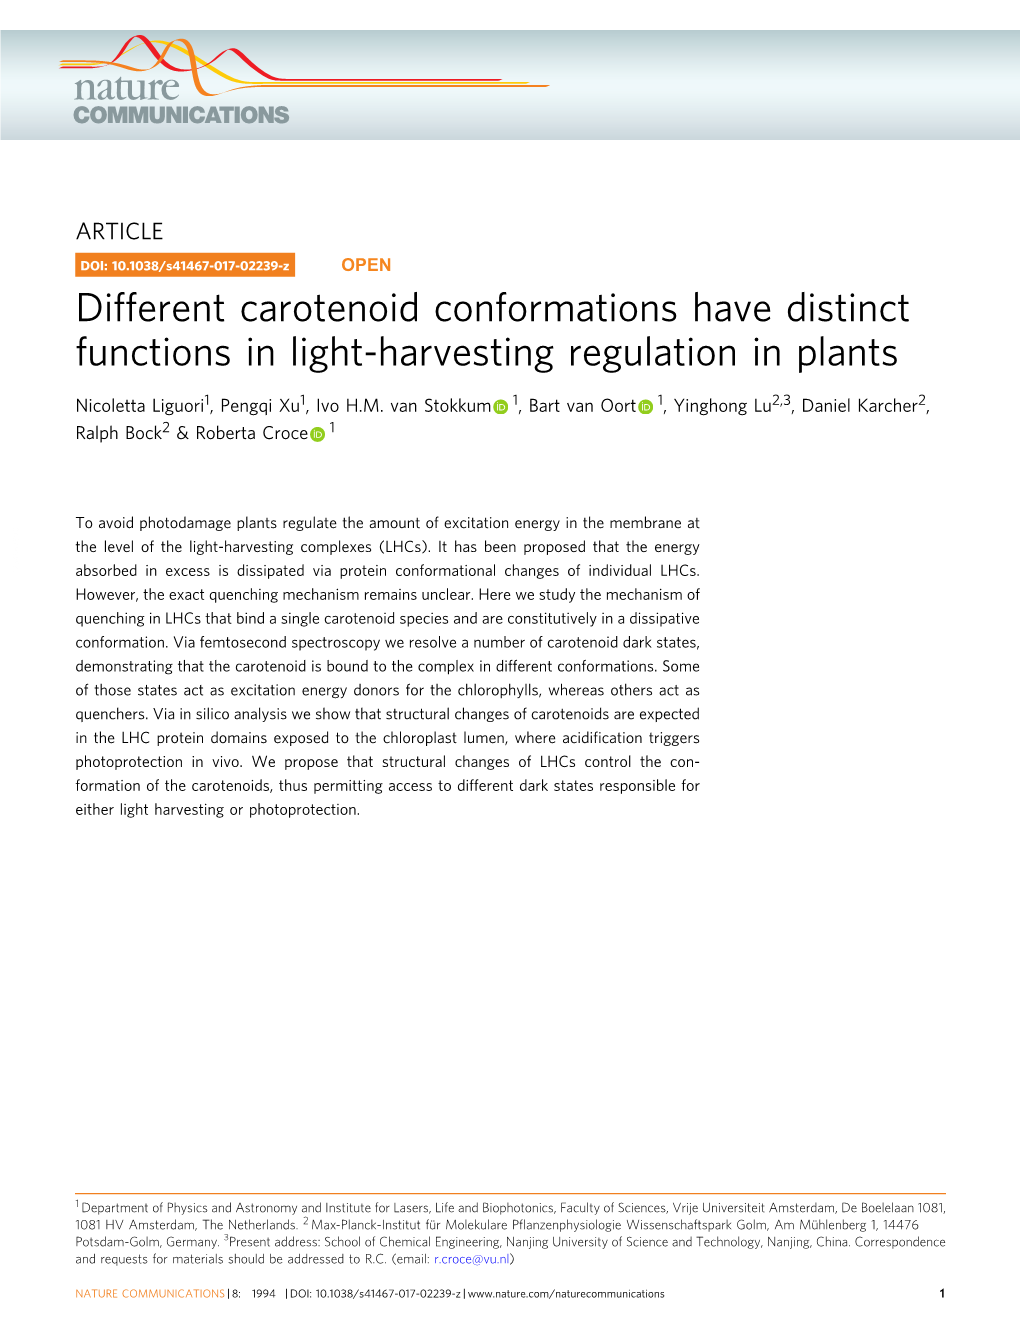 Different Carotenoid Conformations Have Distinct Functions in Light-Harvesting Regulation in Plants